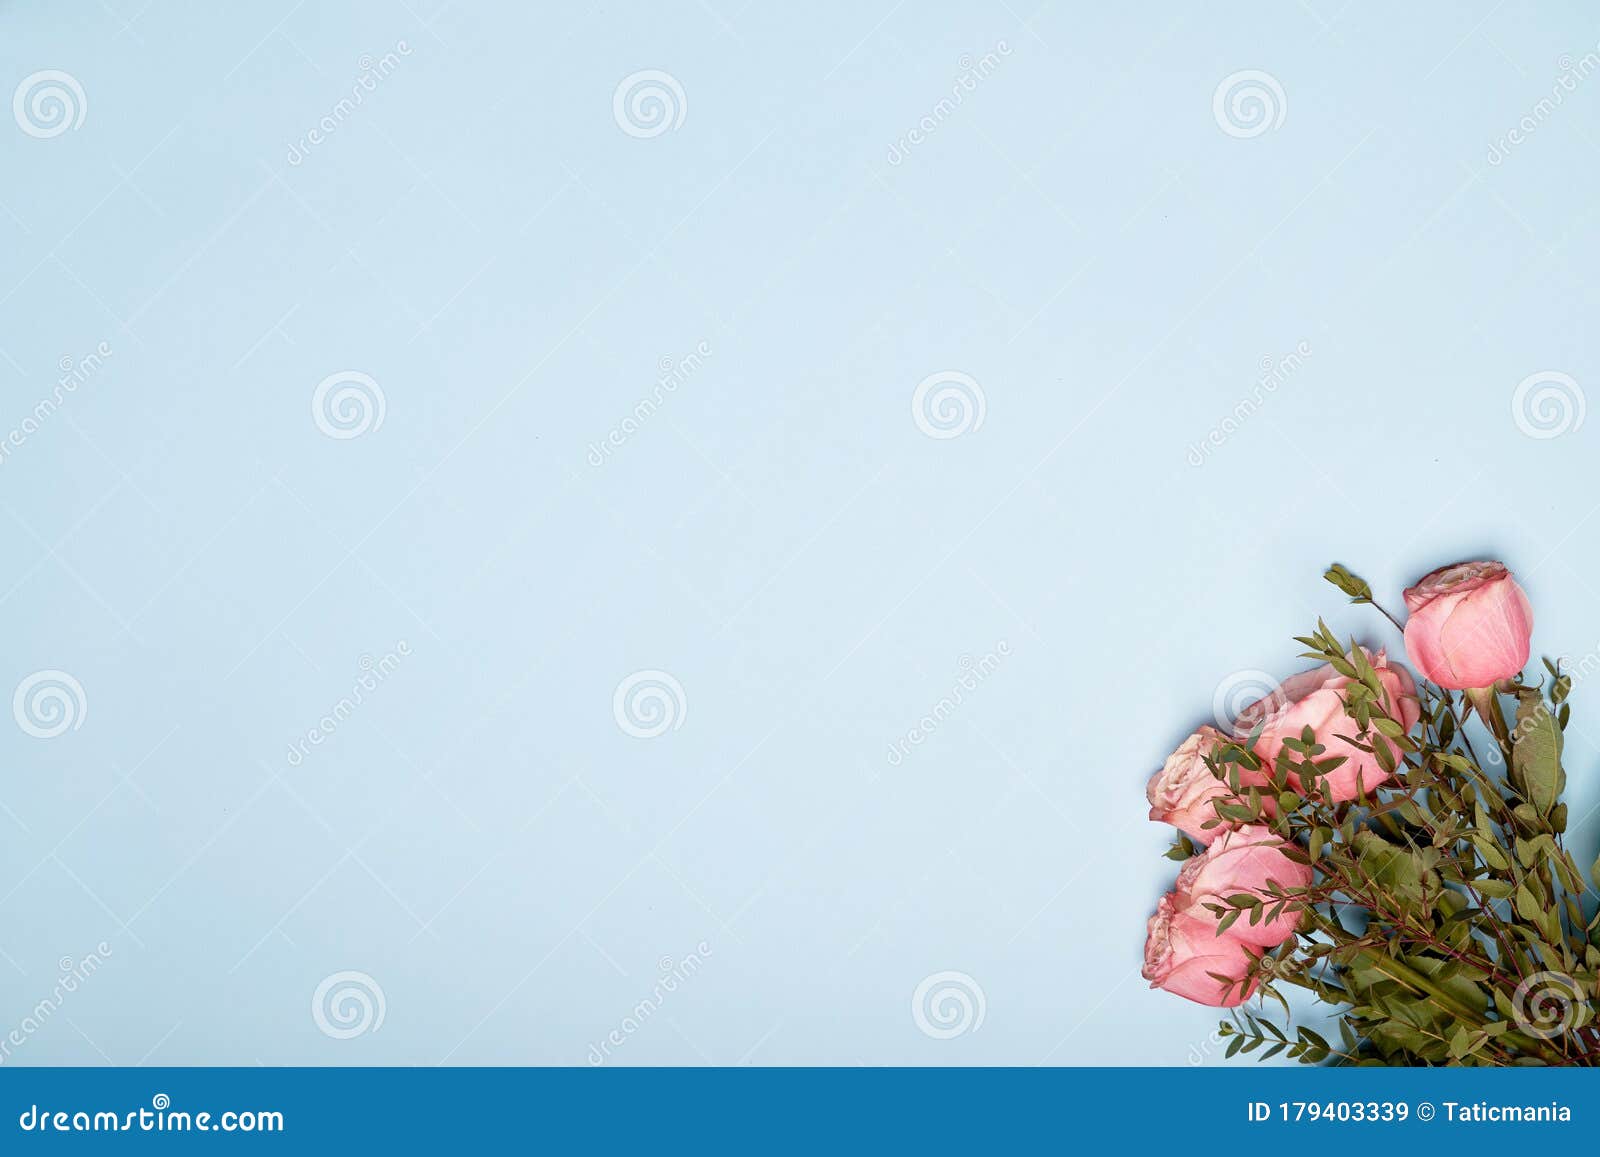 Pink Roses Bouquet on Blue Paper Background Stock Image - Image of desk ...